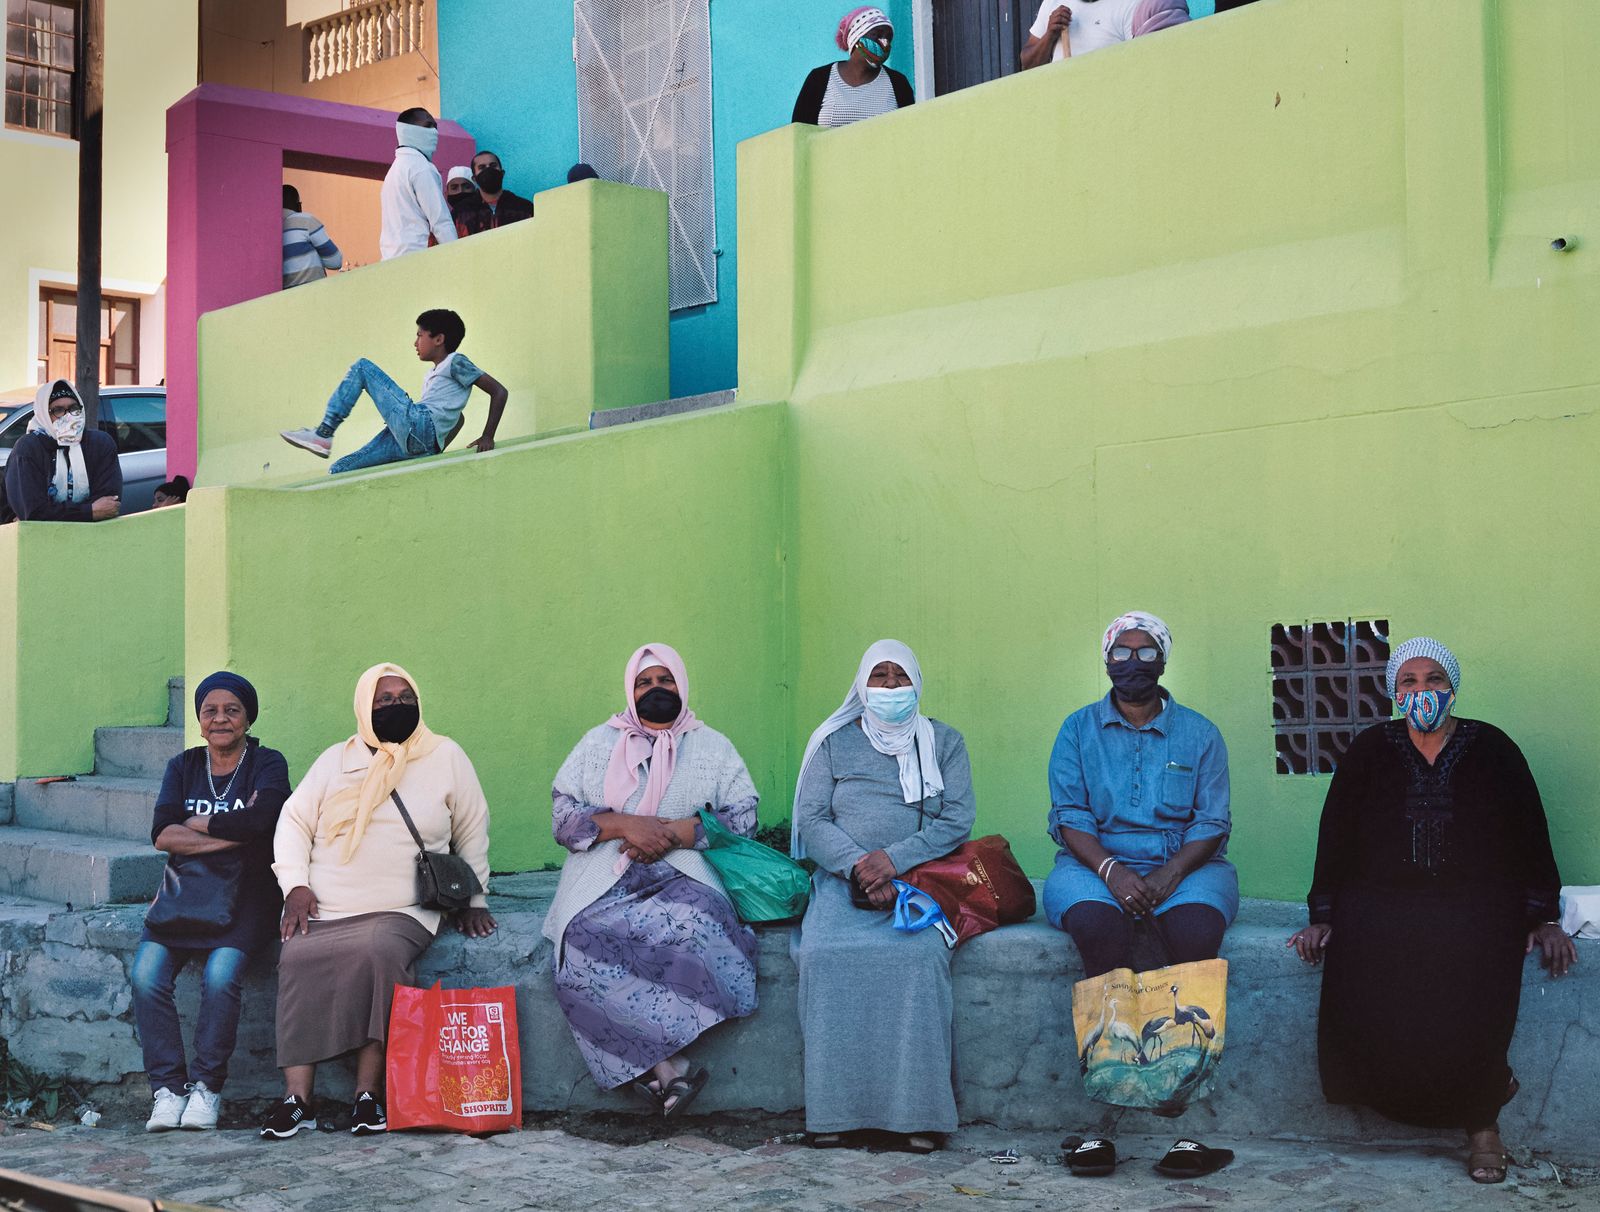 © Ayesha Kazim - A group of women from the community wait for their meals outside of the Bo Kaap Cultural Hub.